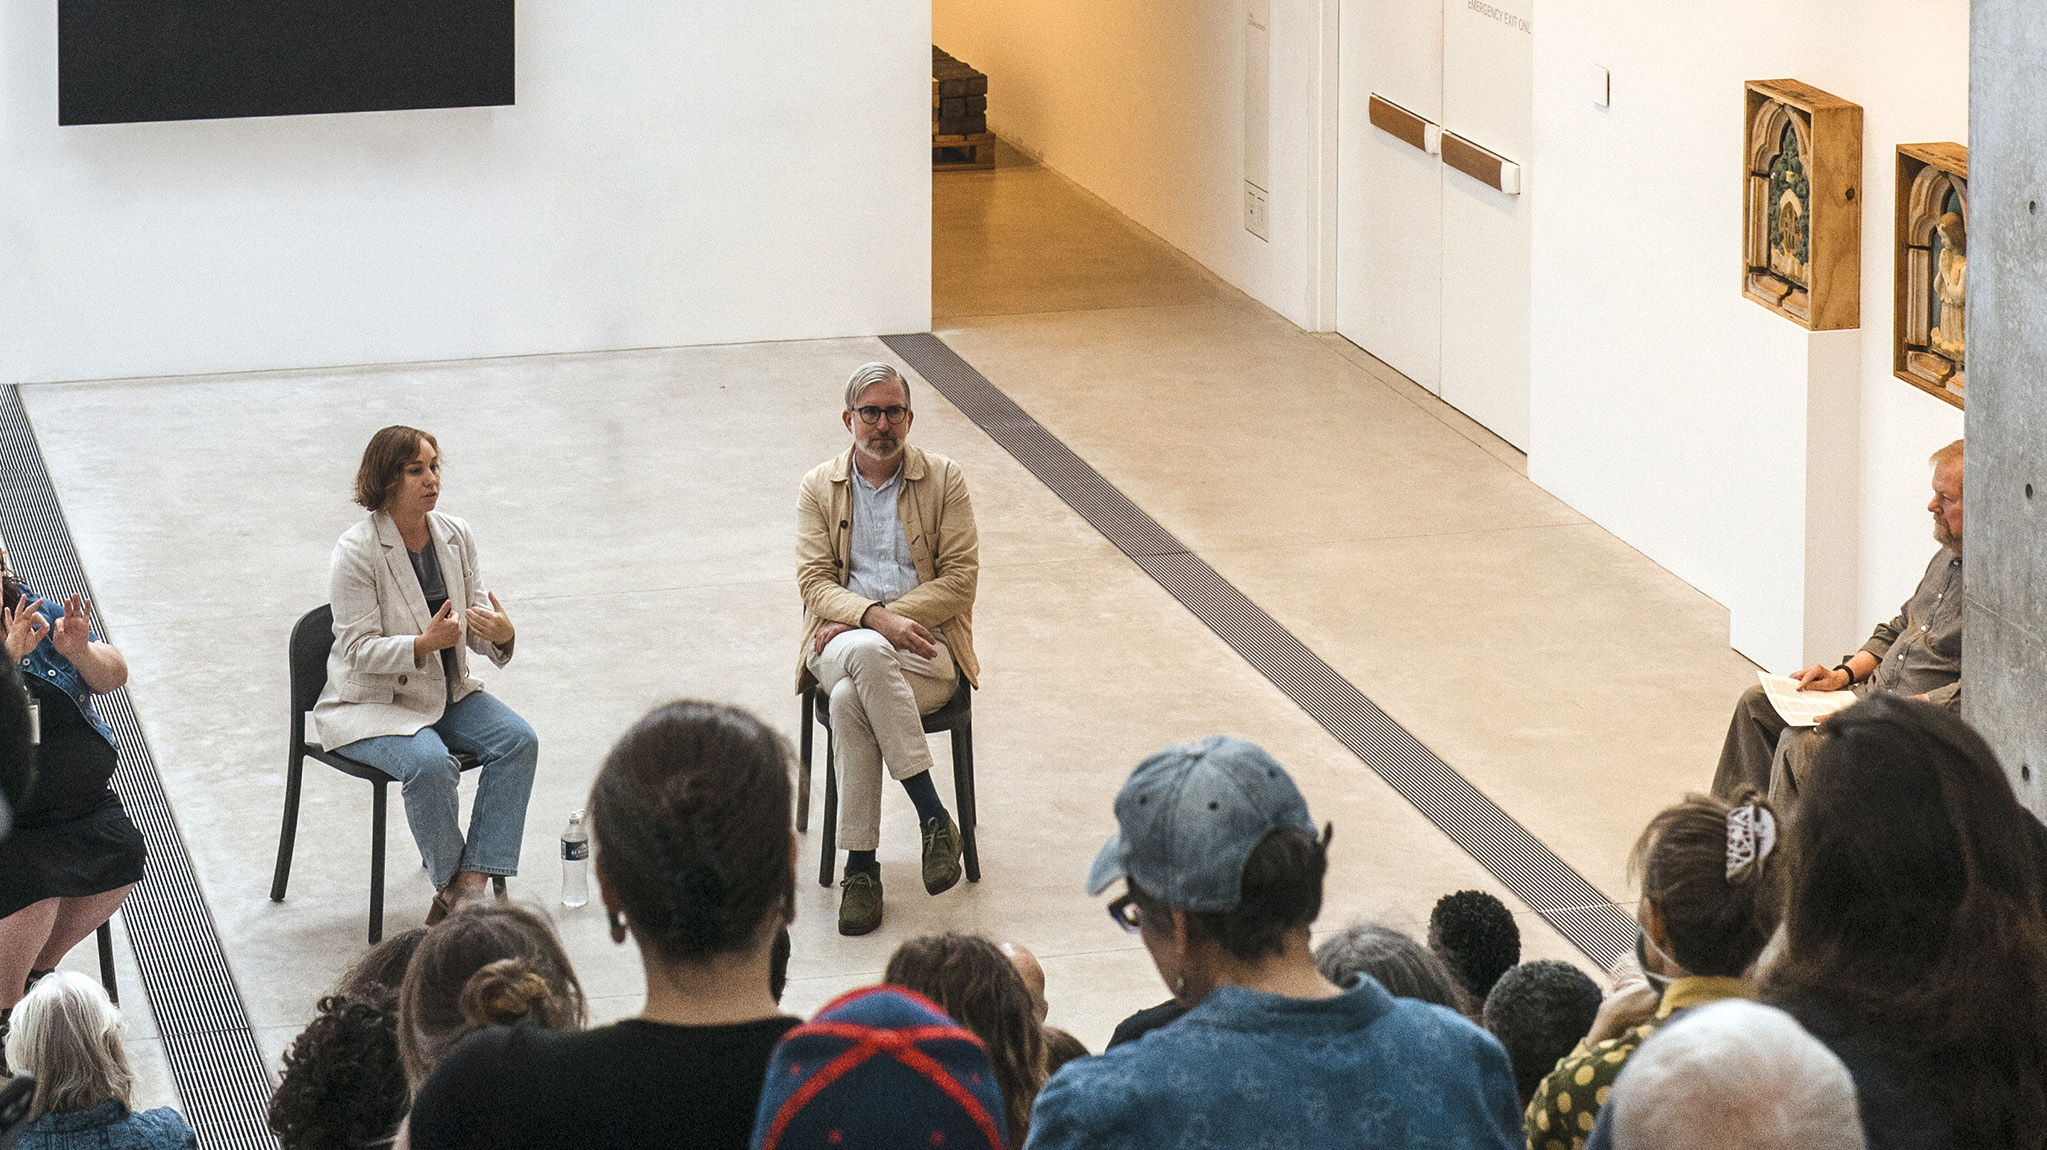 Michael Allen and Stephanie Weissberg seated in front of a crowd in the museum